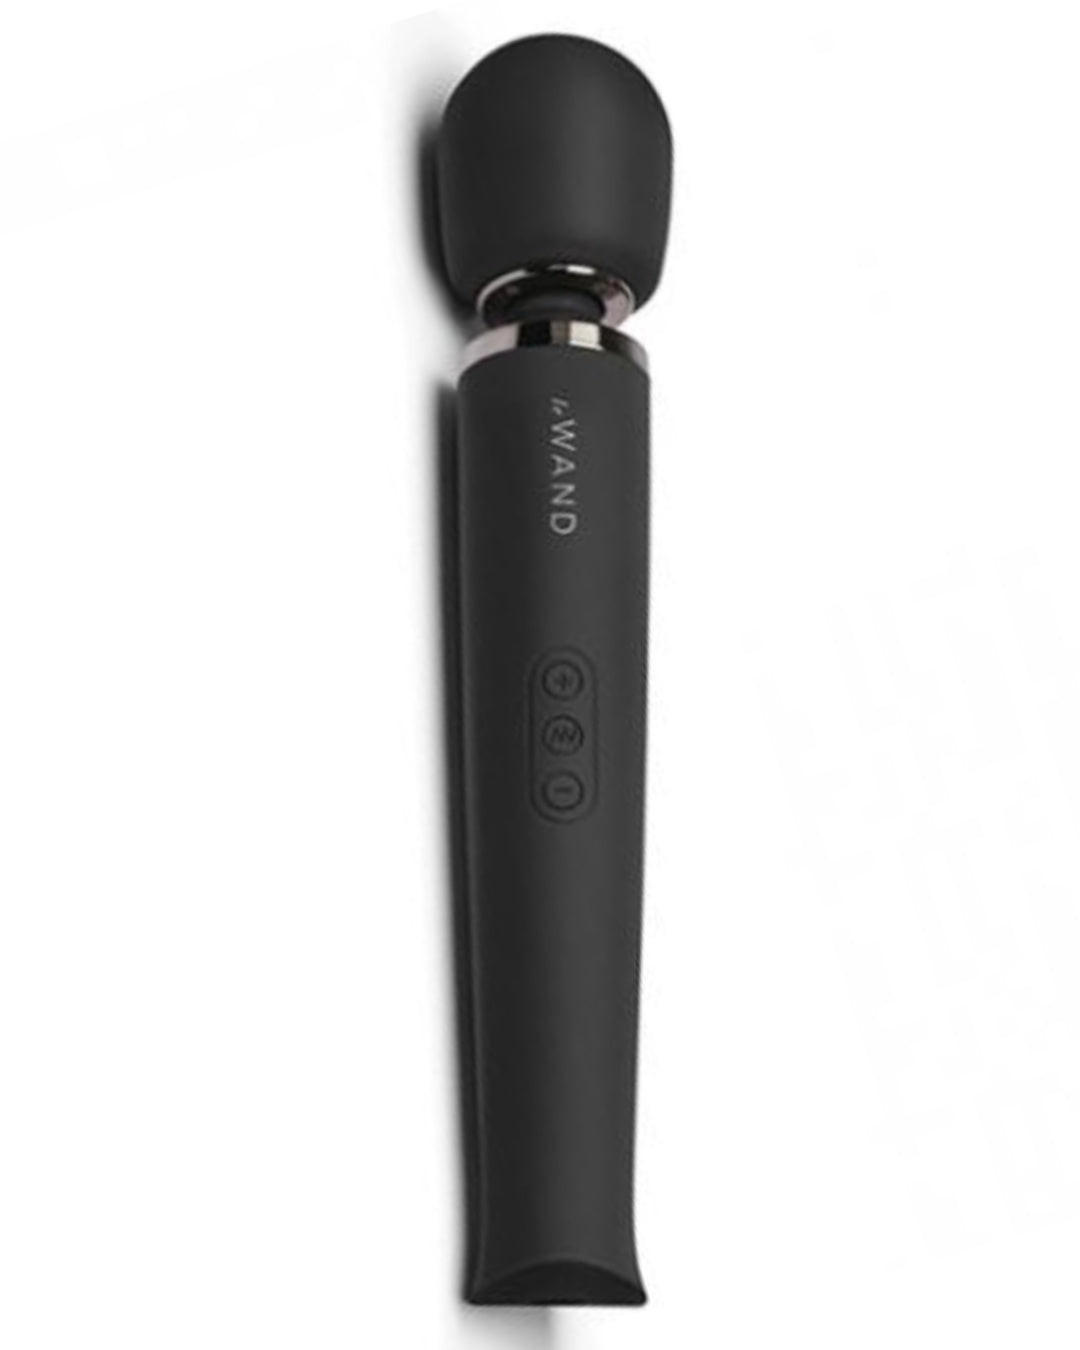 Le Wand Cordless Vibrating Massager - Black horizontal on a white background showing the buttons